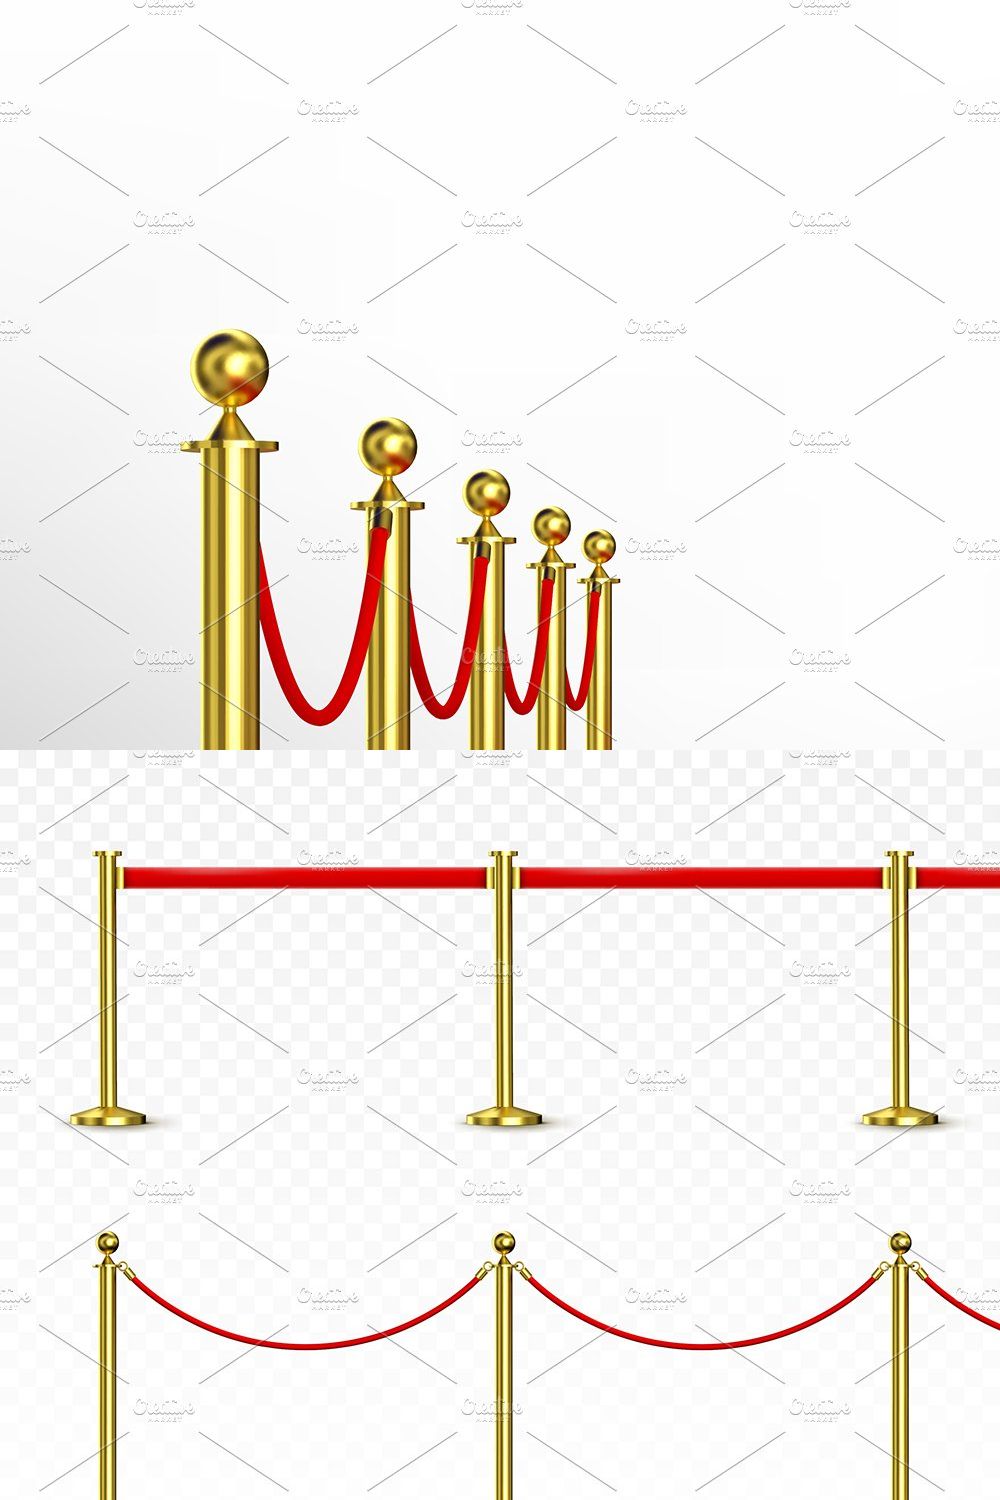 Barrier ropes and red carpet pinterest preview image.